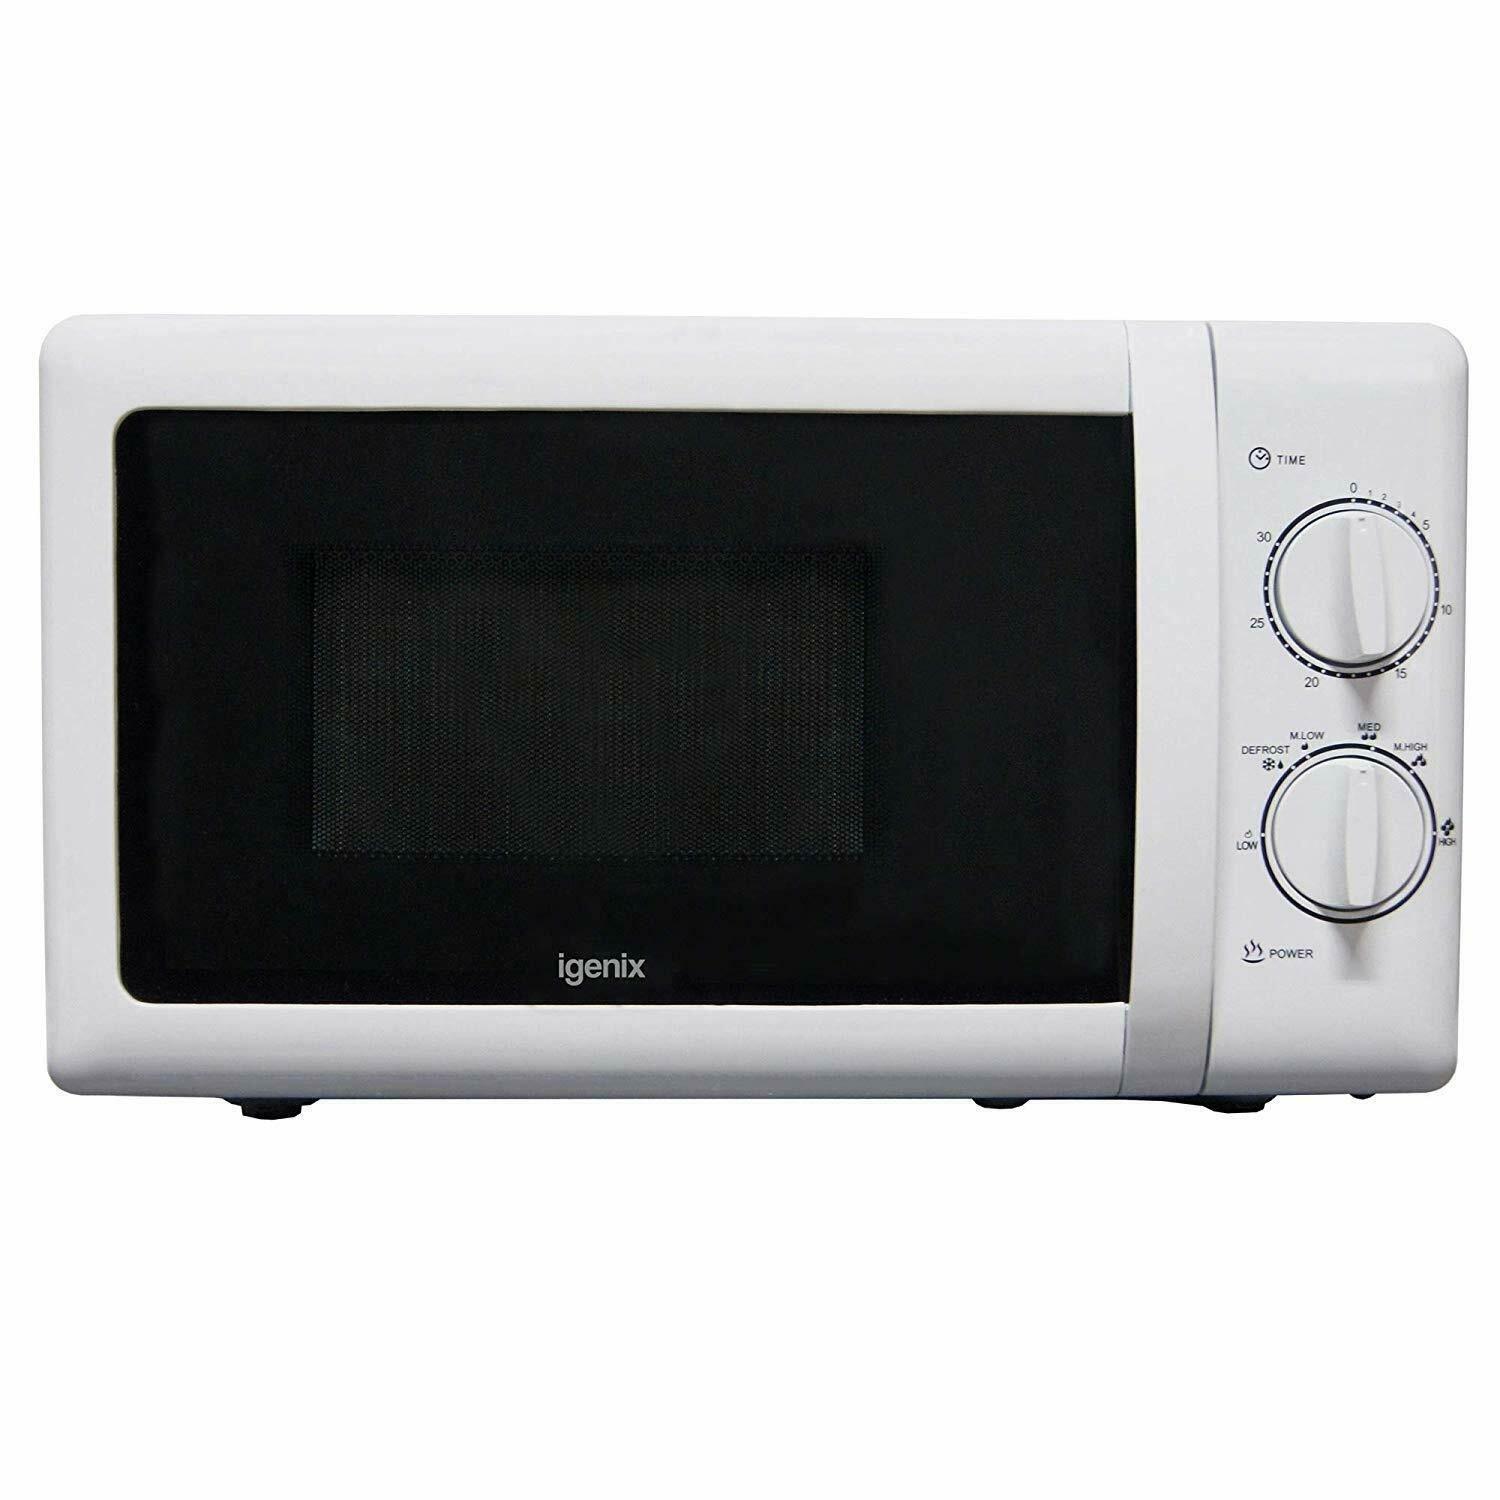 Manual Microwave, 6 Power Levels Including Defrost